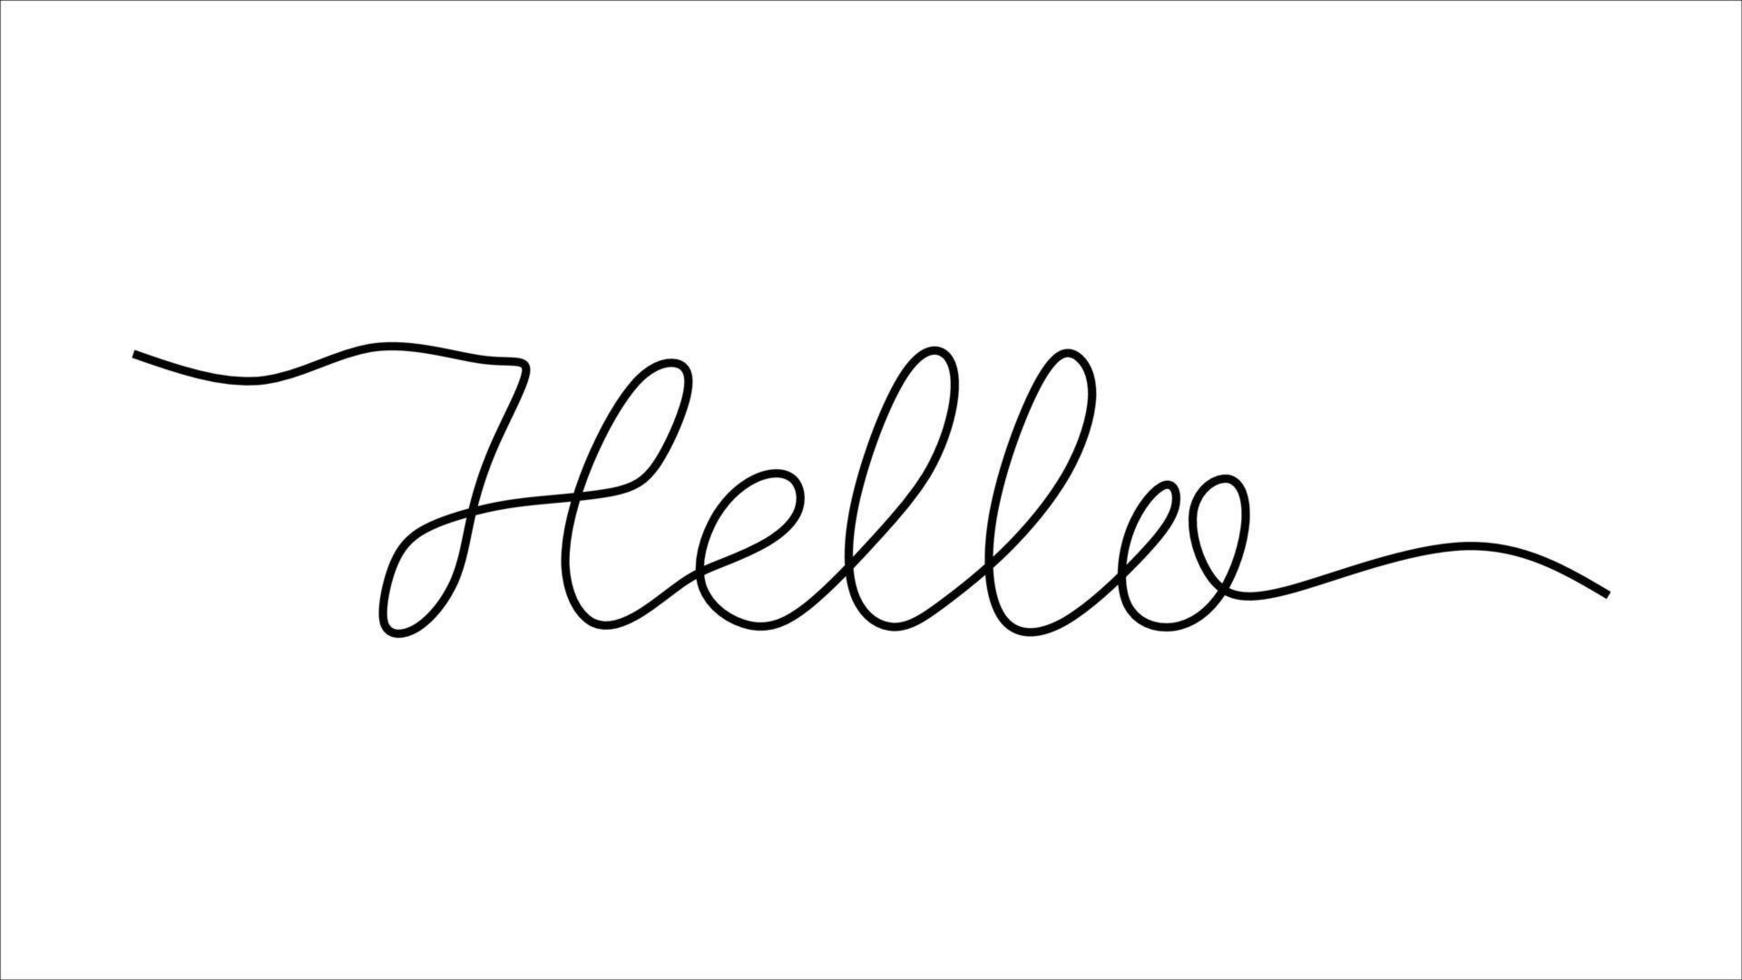 Hello greeting word oneline continuous editable line art vector